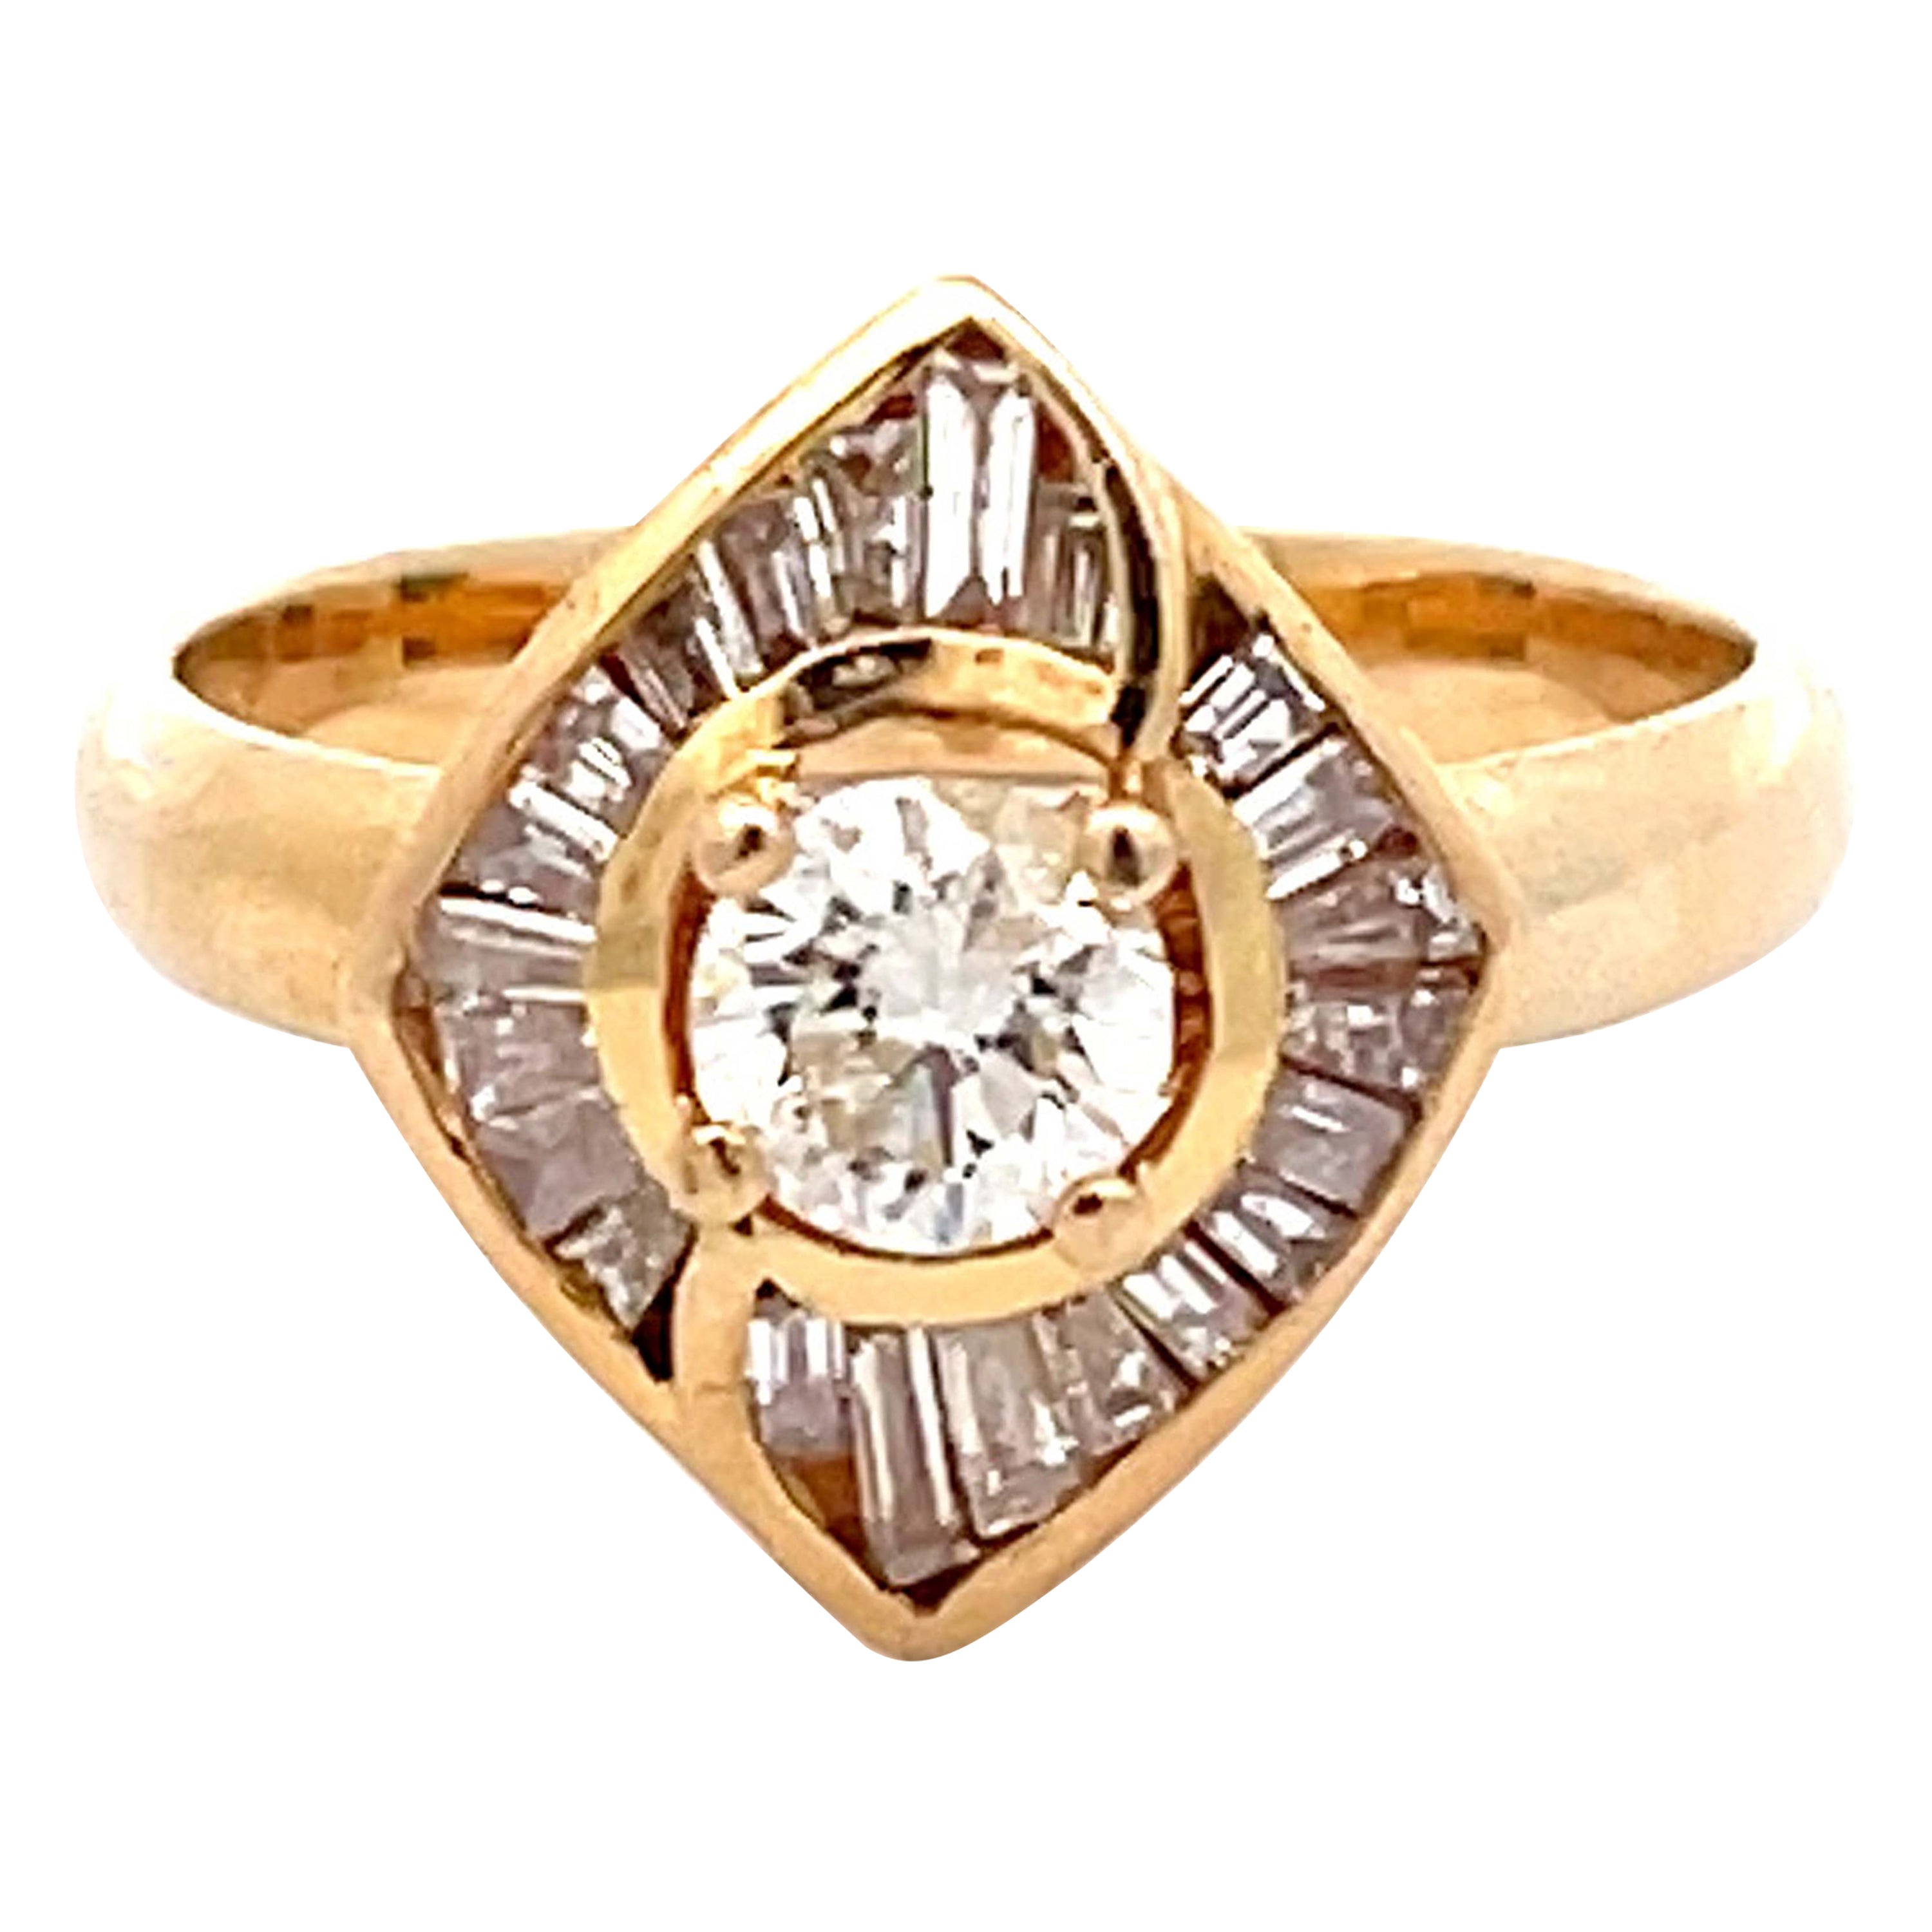 Round Brilliant Cut Diamond in Halo Engagement Ring in 18K Gold